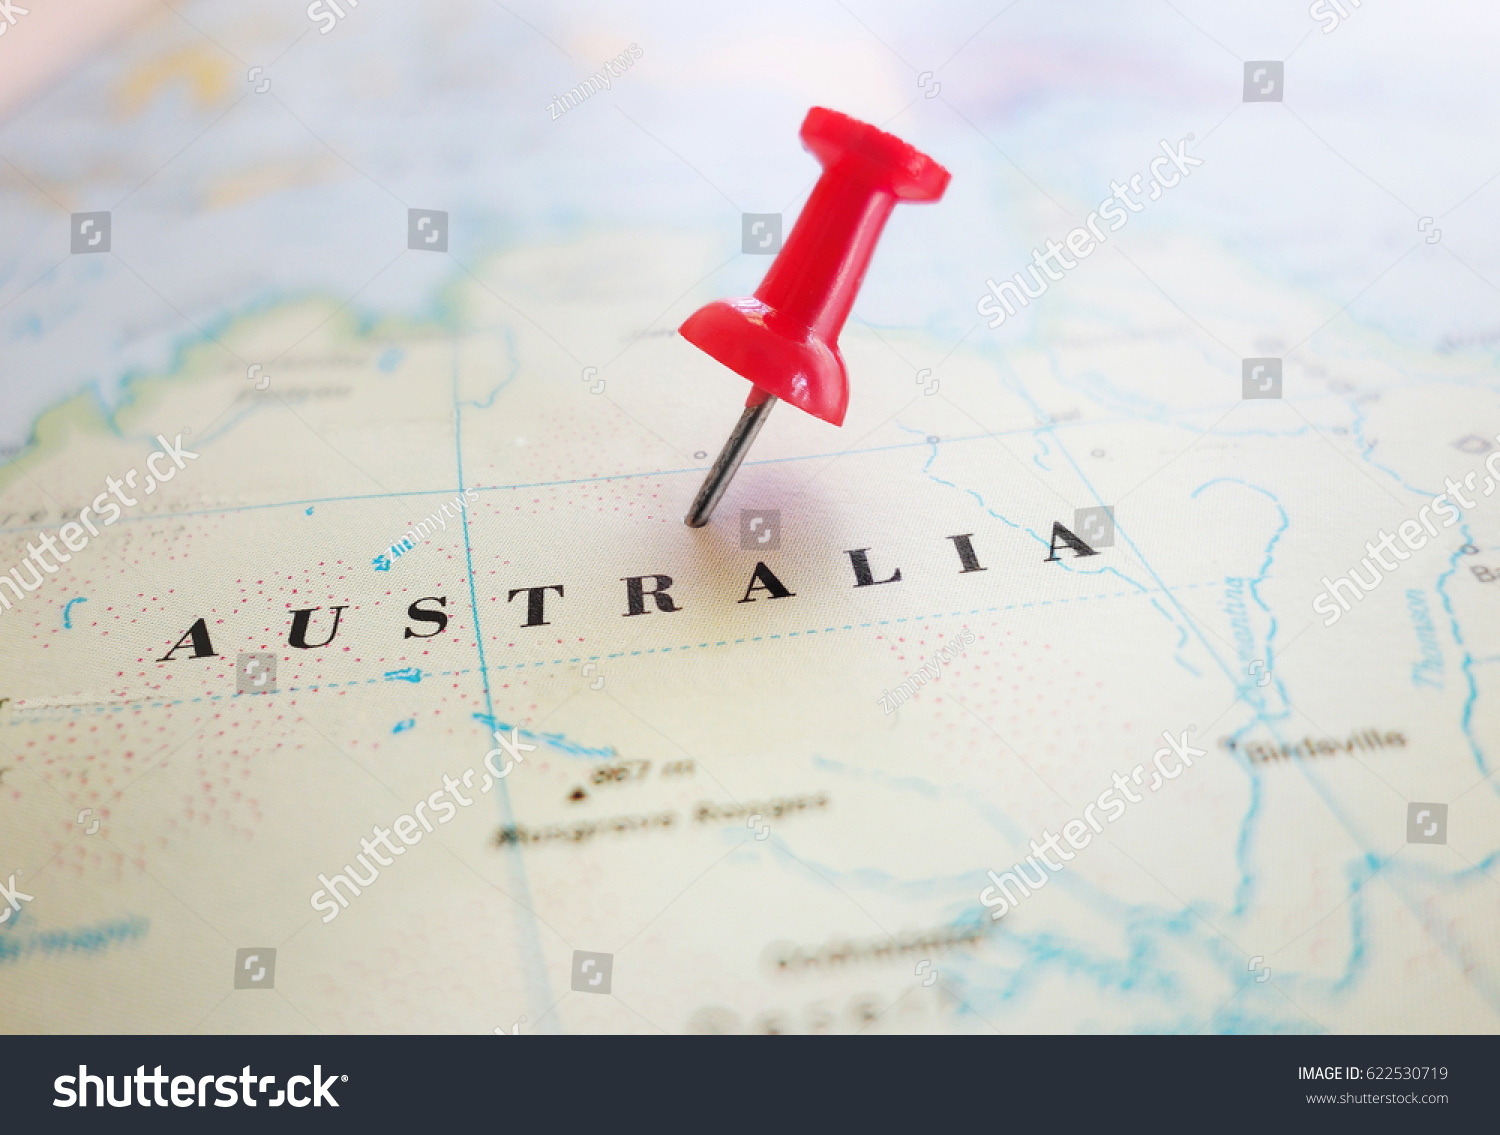 Closeup of an Australia map with red thumb tack                                #622530719